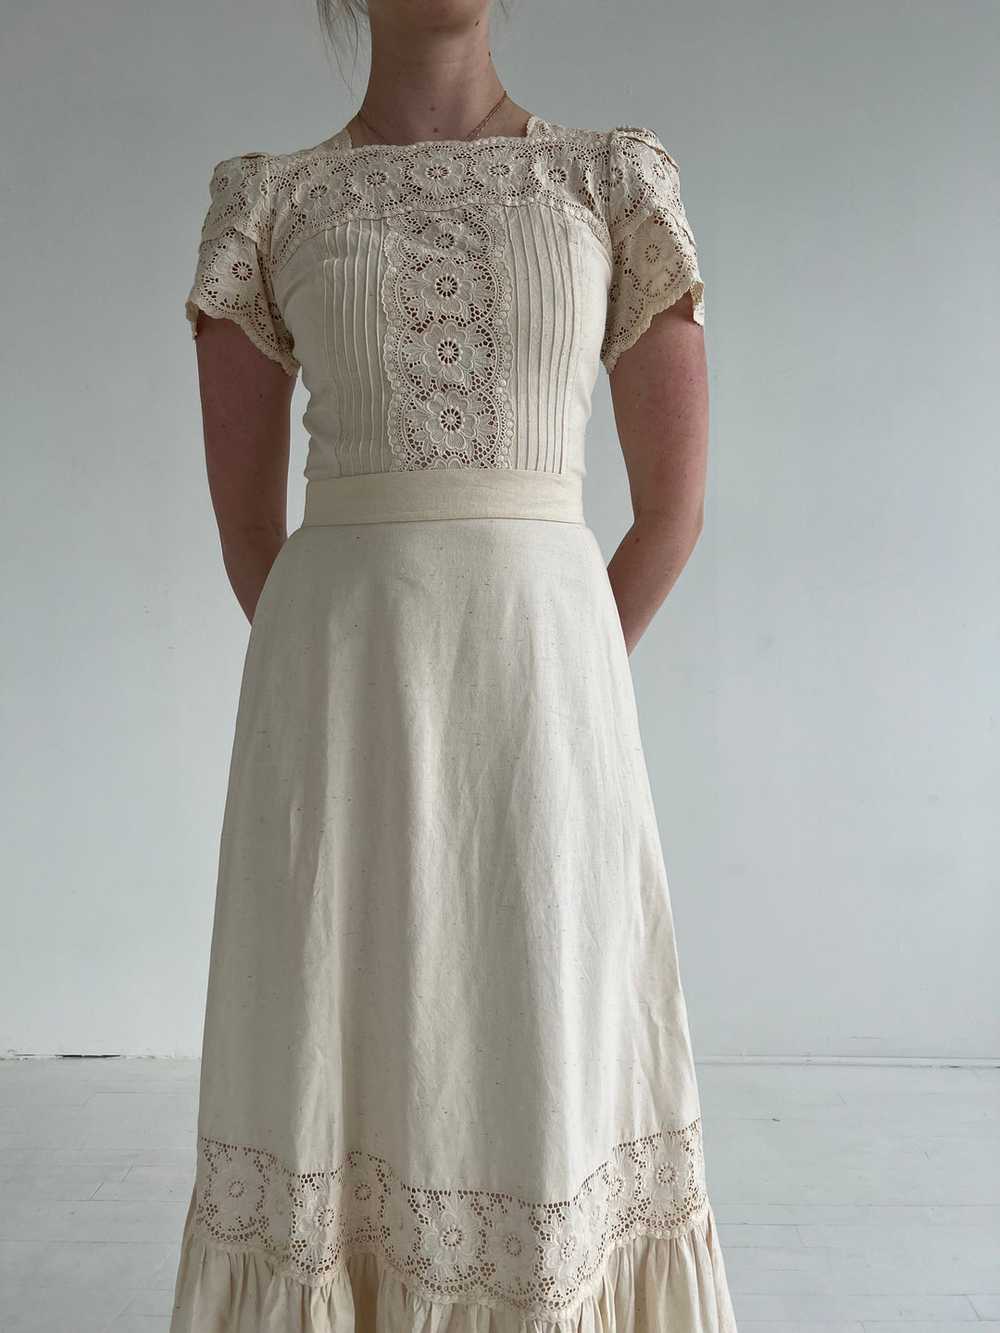 1970's Cotton Dress with Eyelet - image 3